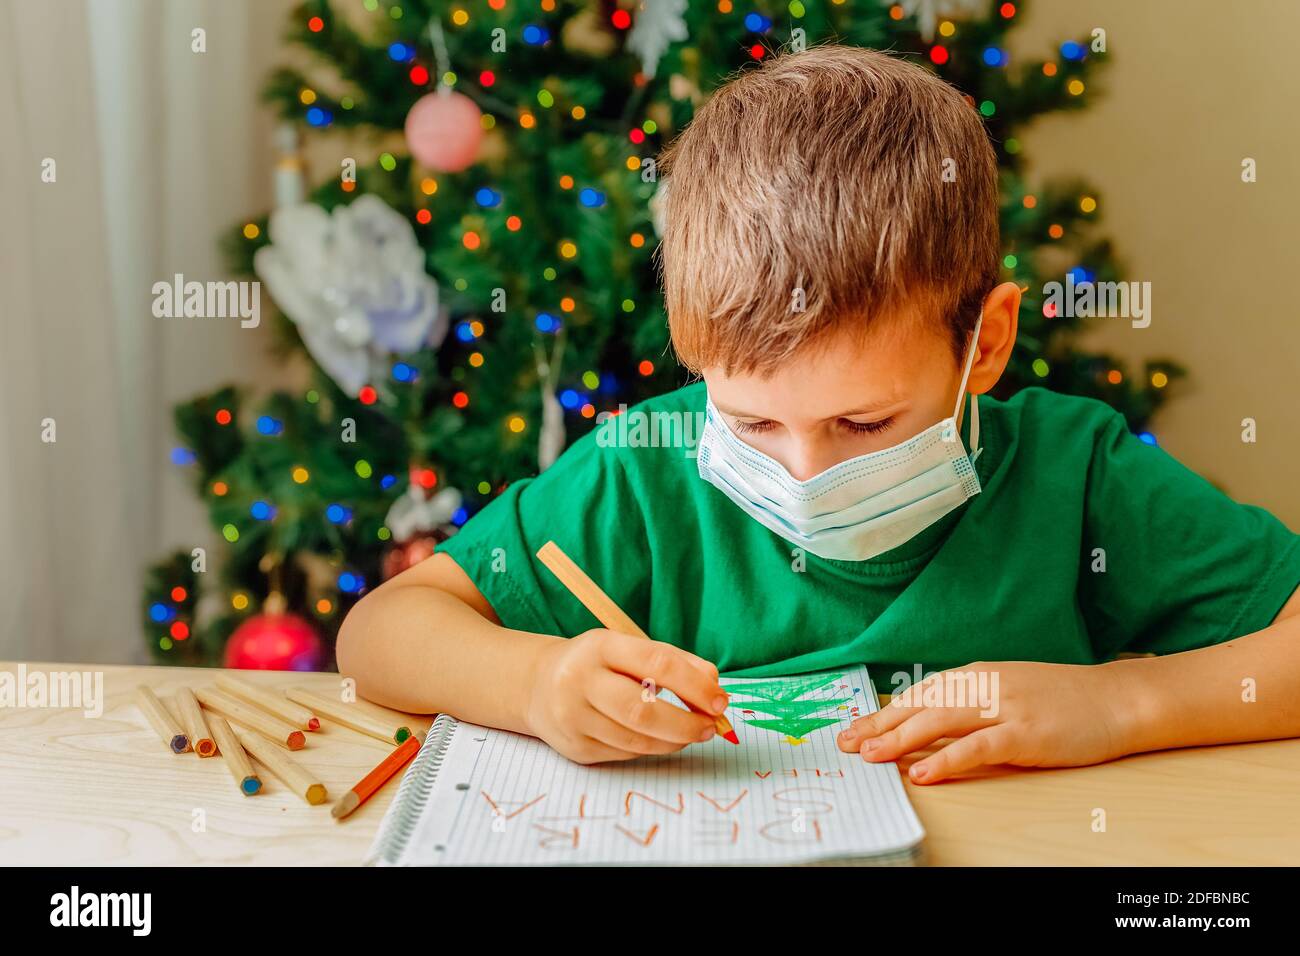 Smiling 7 years old boy wearing green t-short write letter to Santa sitting by desk, Christmas tree on background Stock Photo